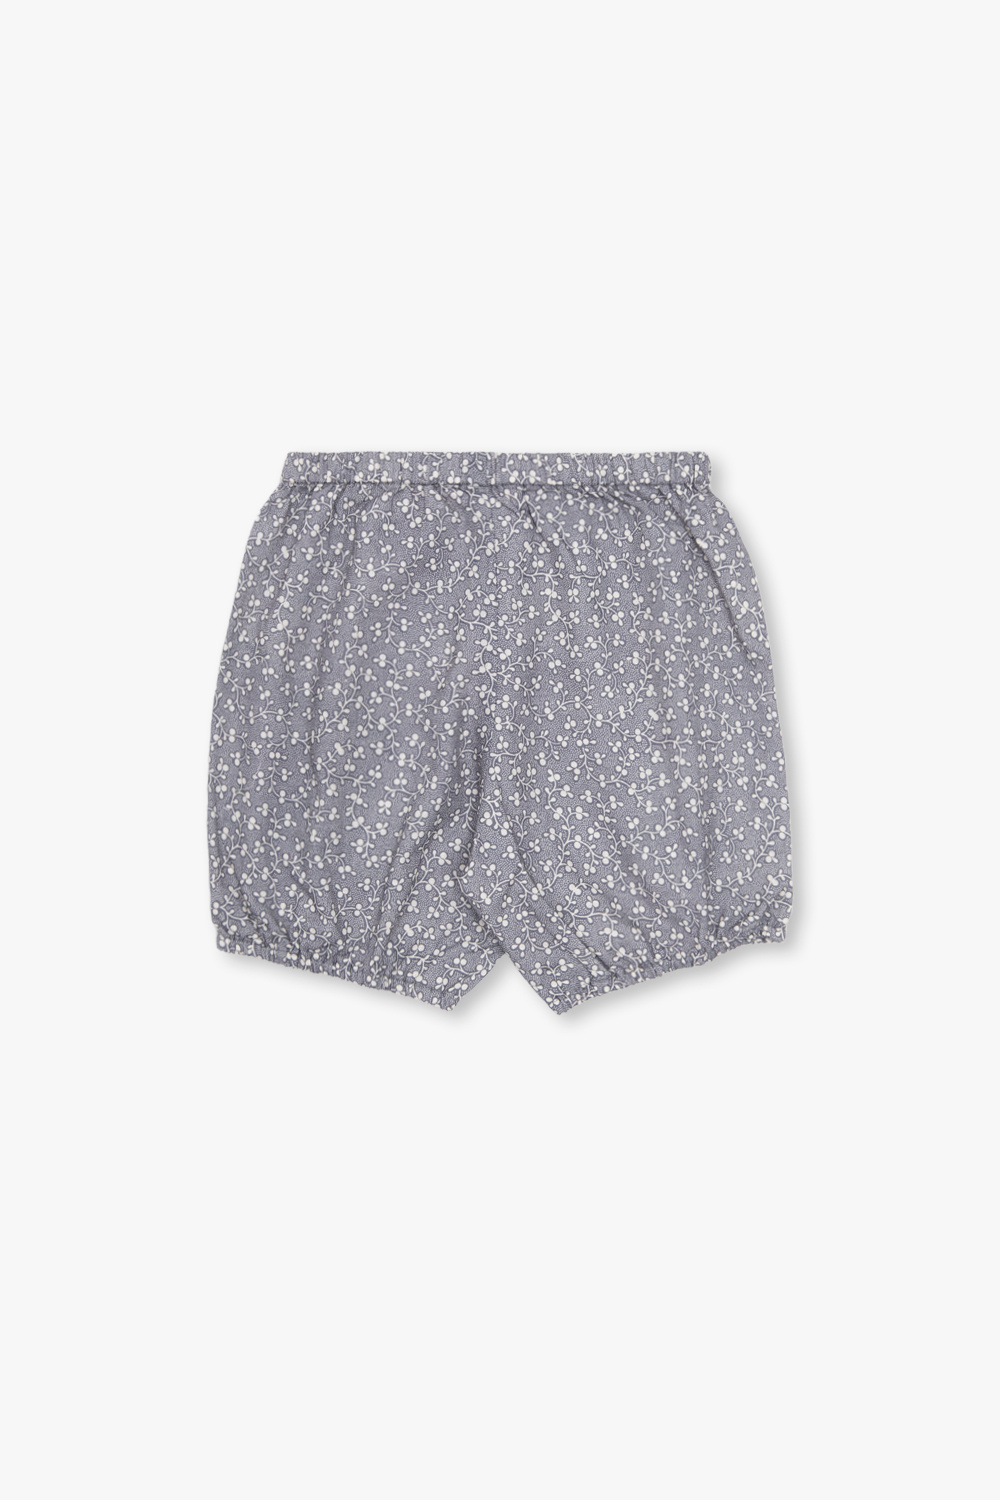 Bonpoint  ‘Doumi’ shorts Floral with floral pattern